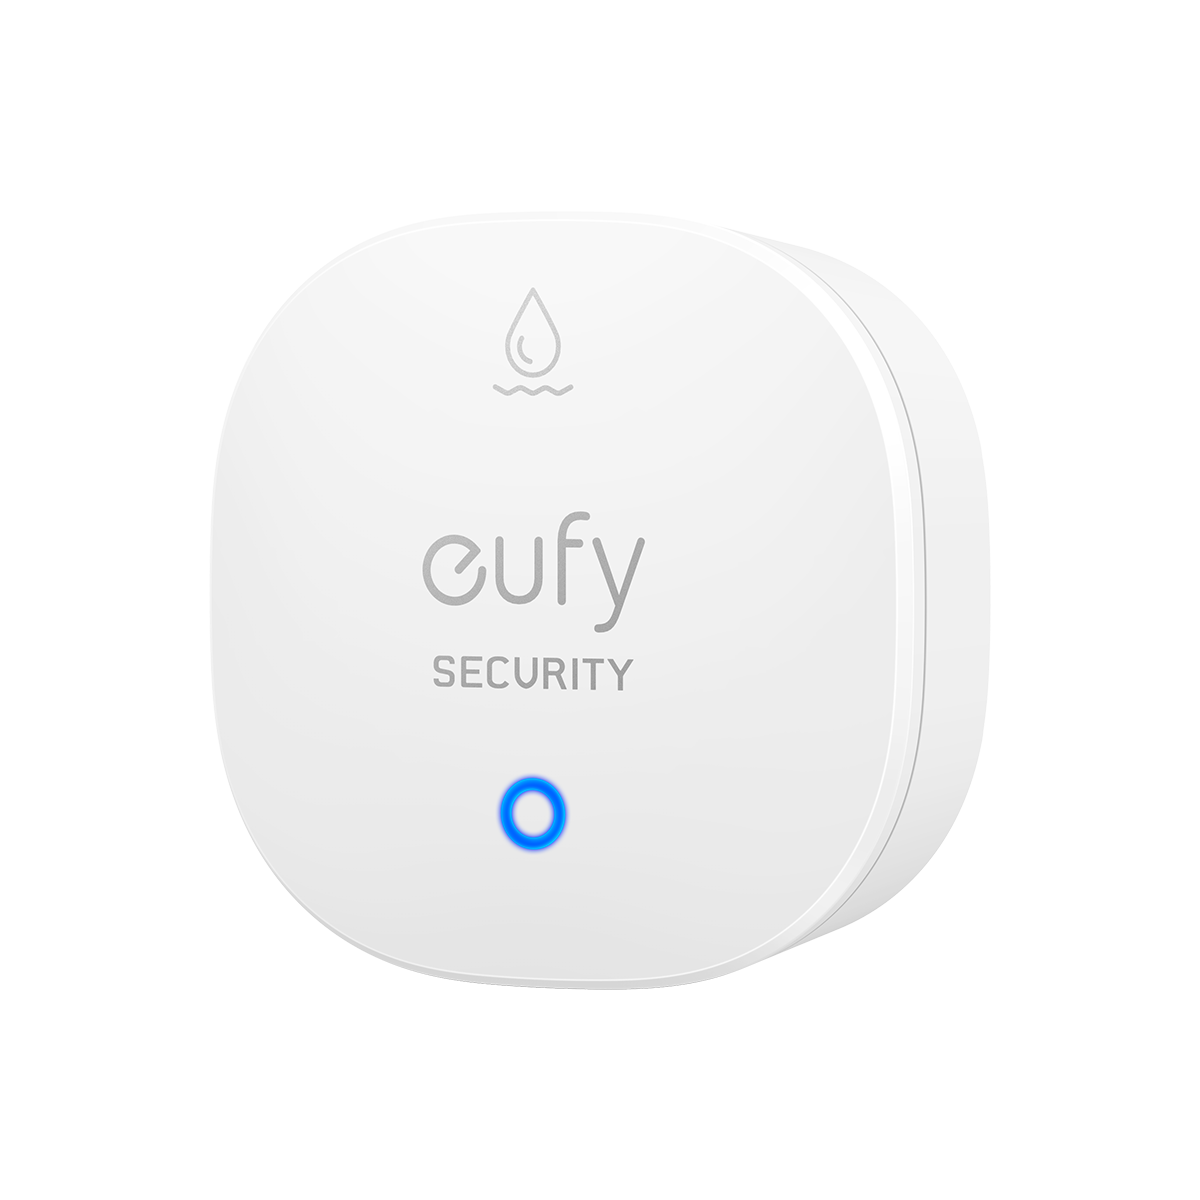 eufy Water and Freeze Sensor with Remote Alerts